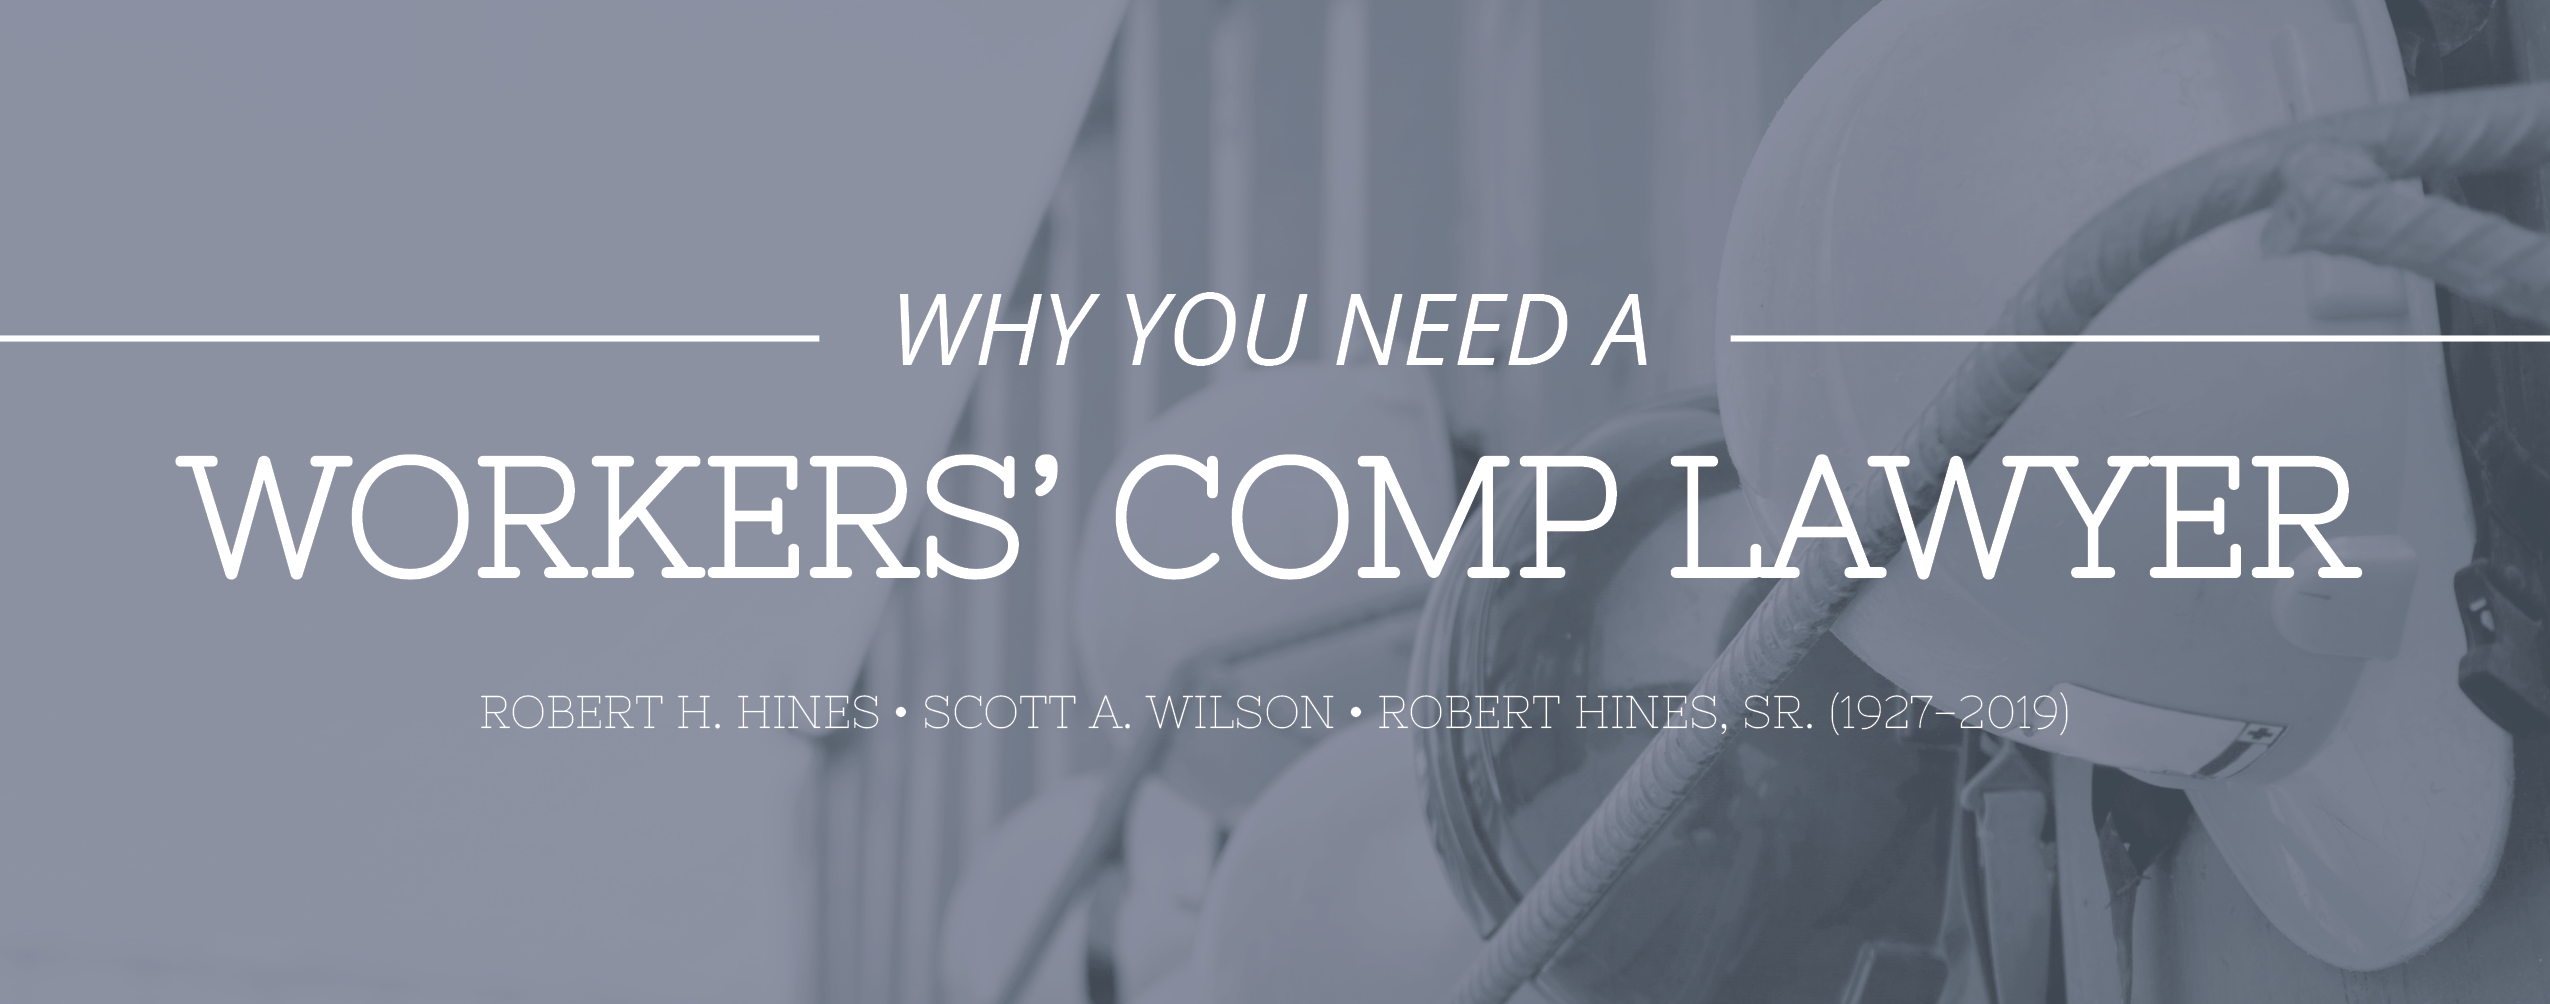 why you need a work comp lawyer whitepaper header